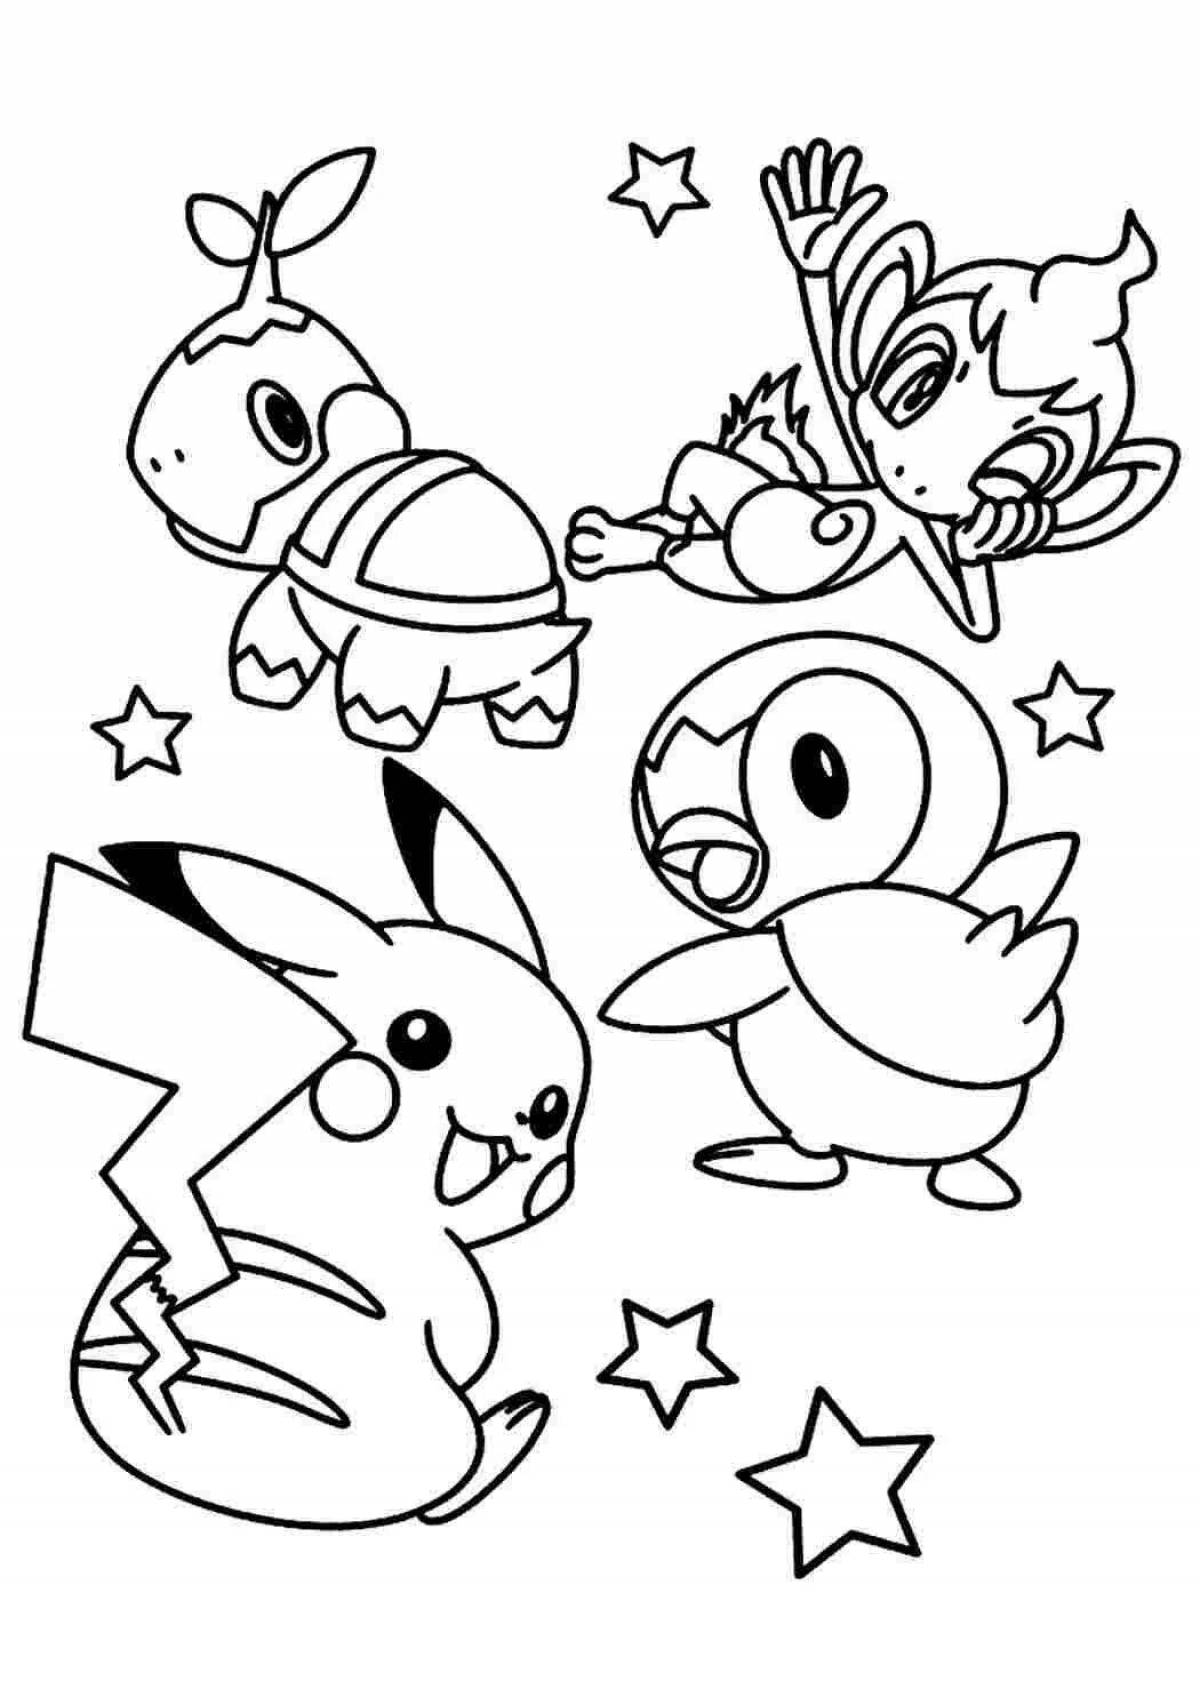 Exquisite pokemon coloring book for kids